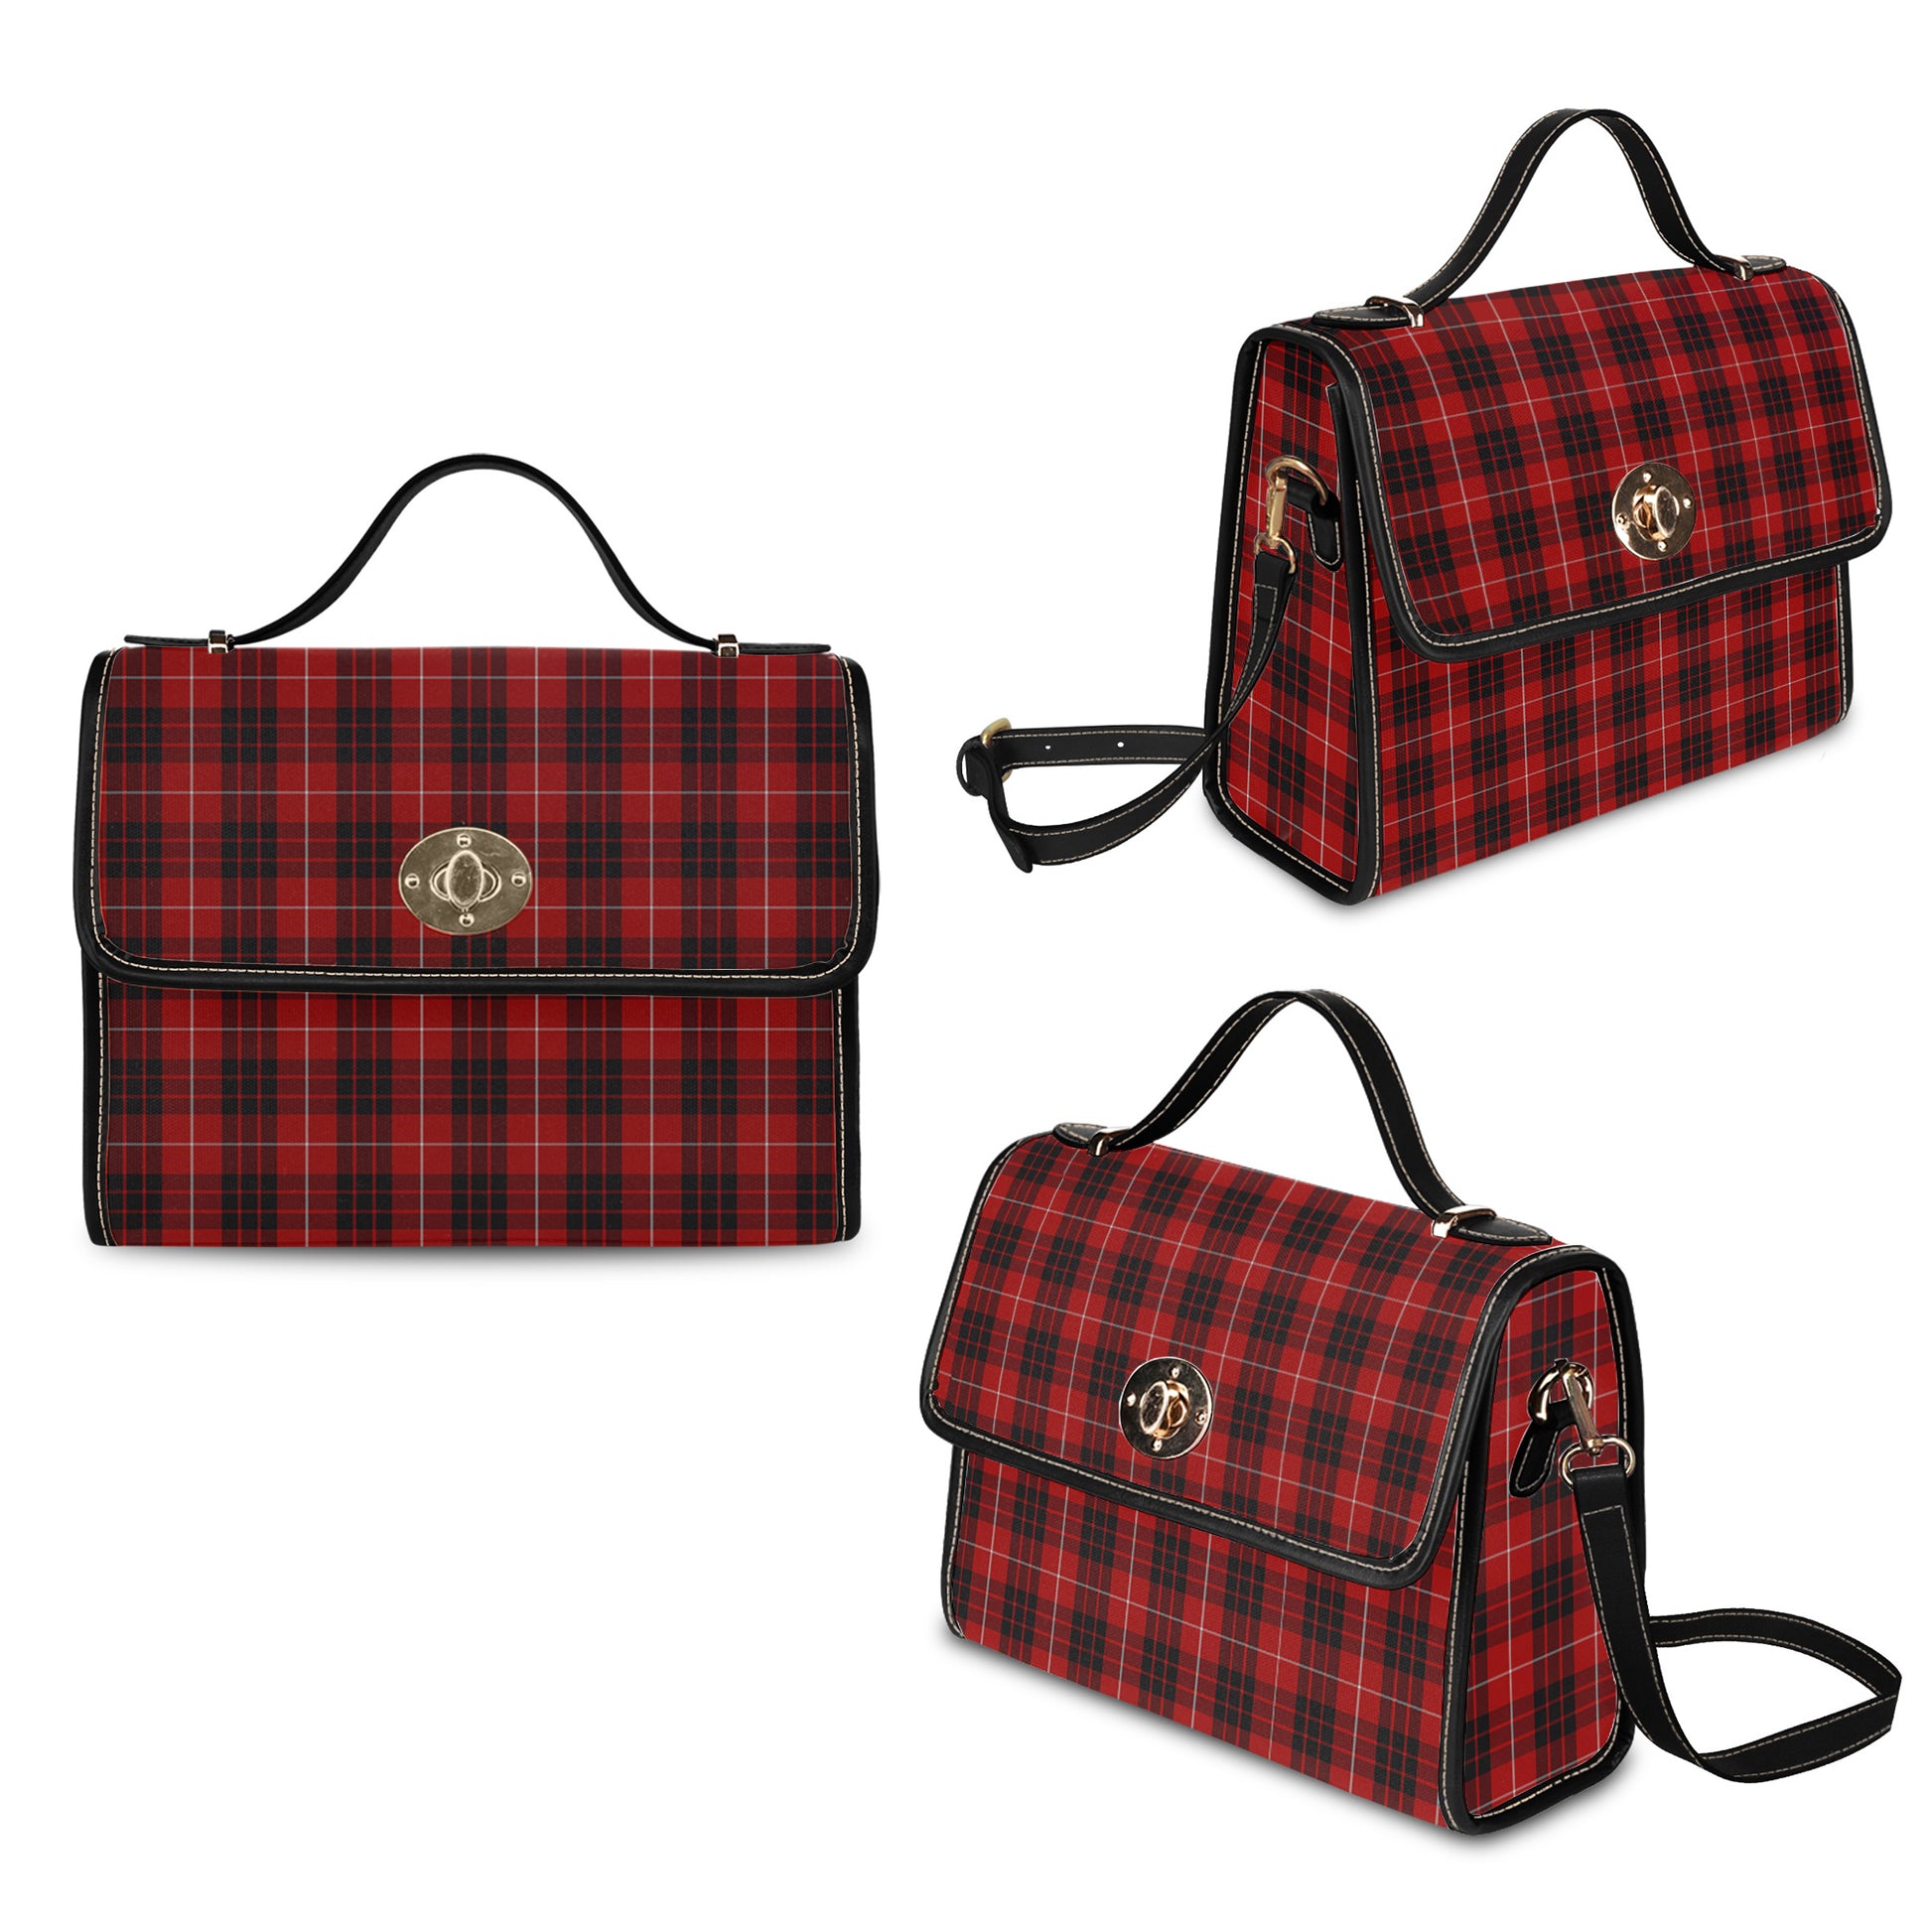 munro-black-and-red-tartan-leather-strap-waterproof-canvas-bag